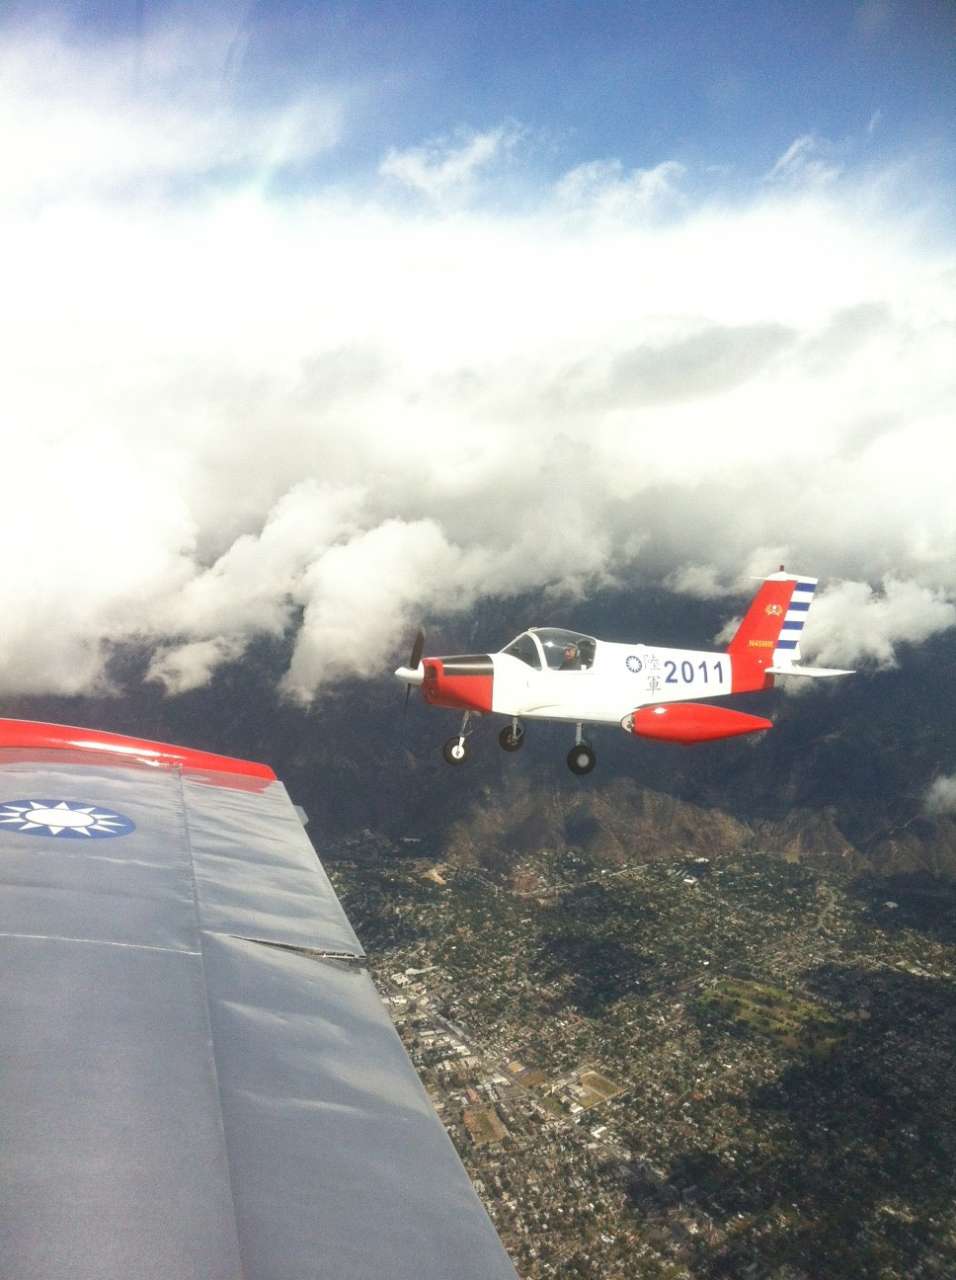 With Jeffrey flying his PL-2 over Pasadena ...